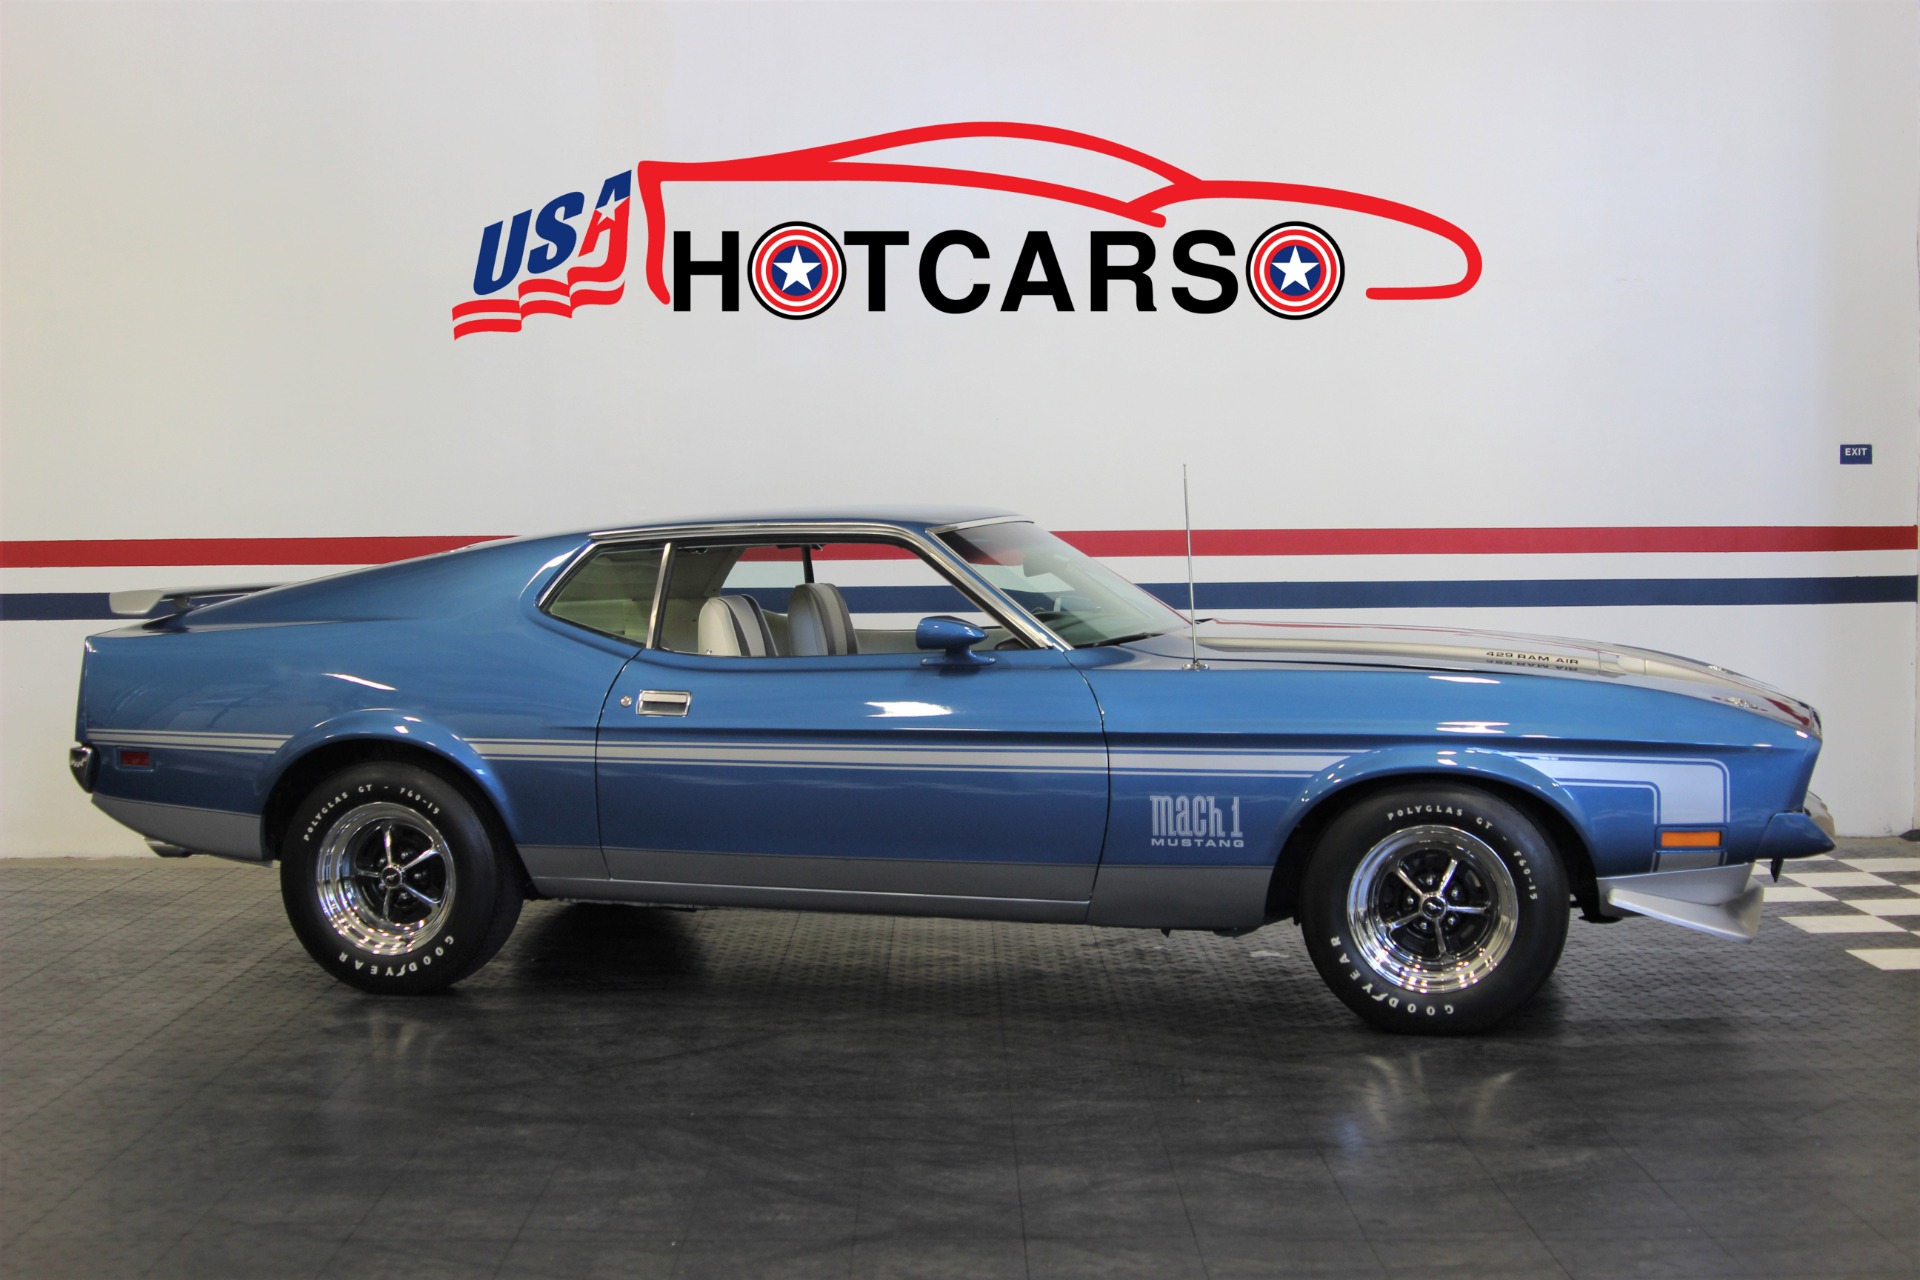 Details About 1971 Ford Mustang Mach 1 429 Scj